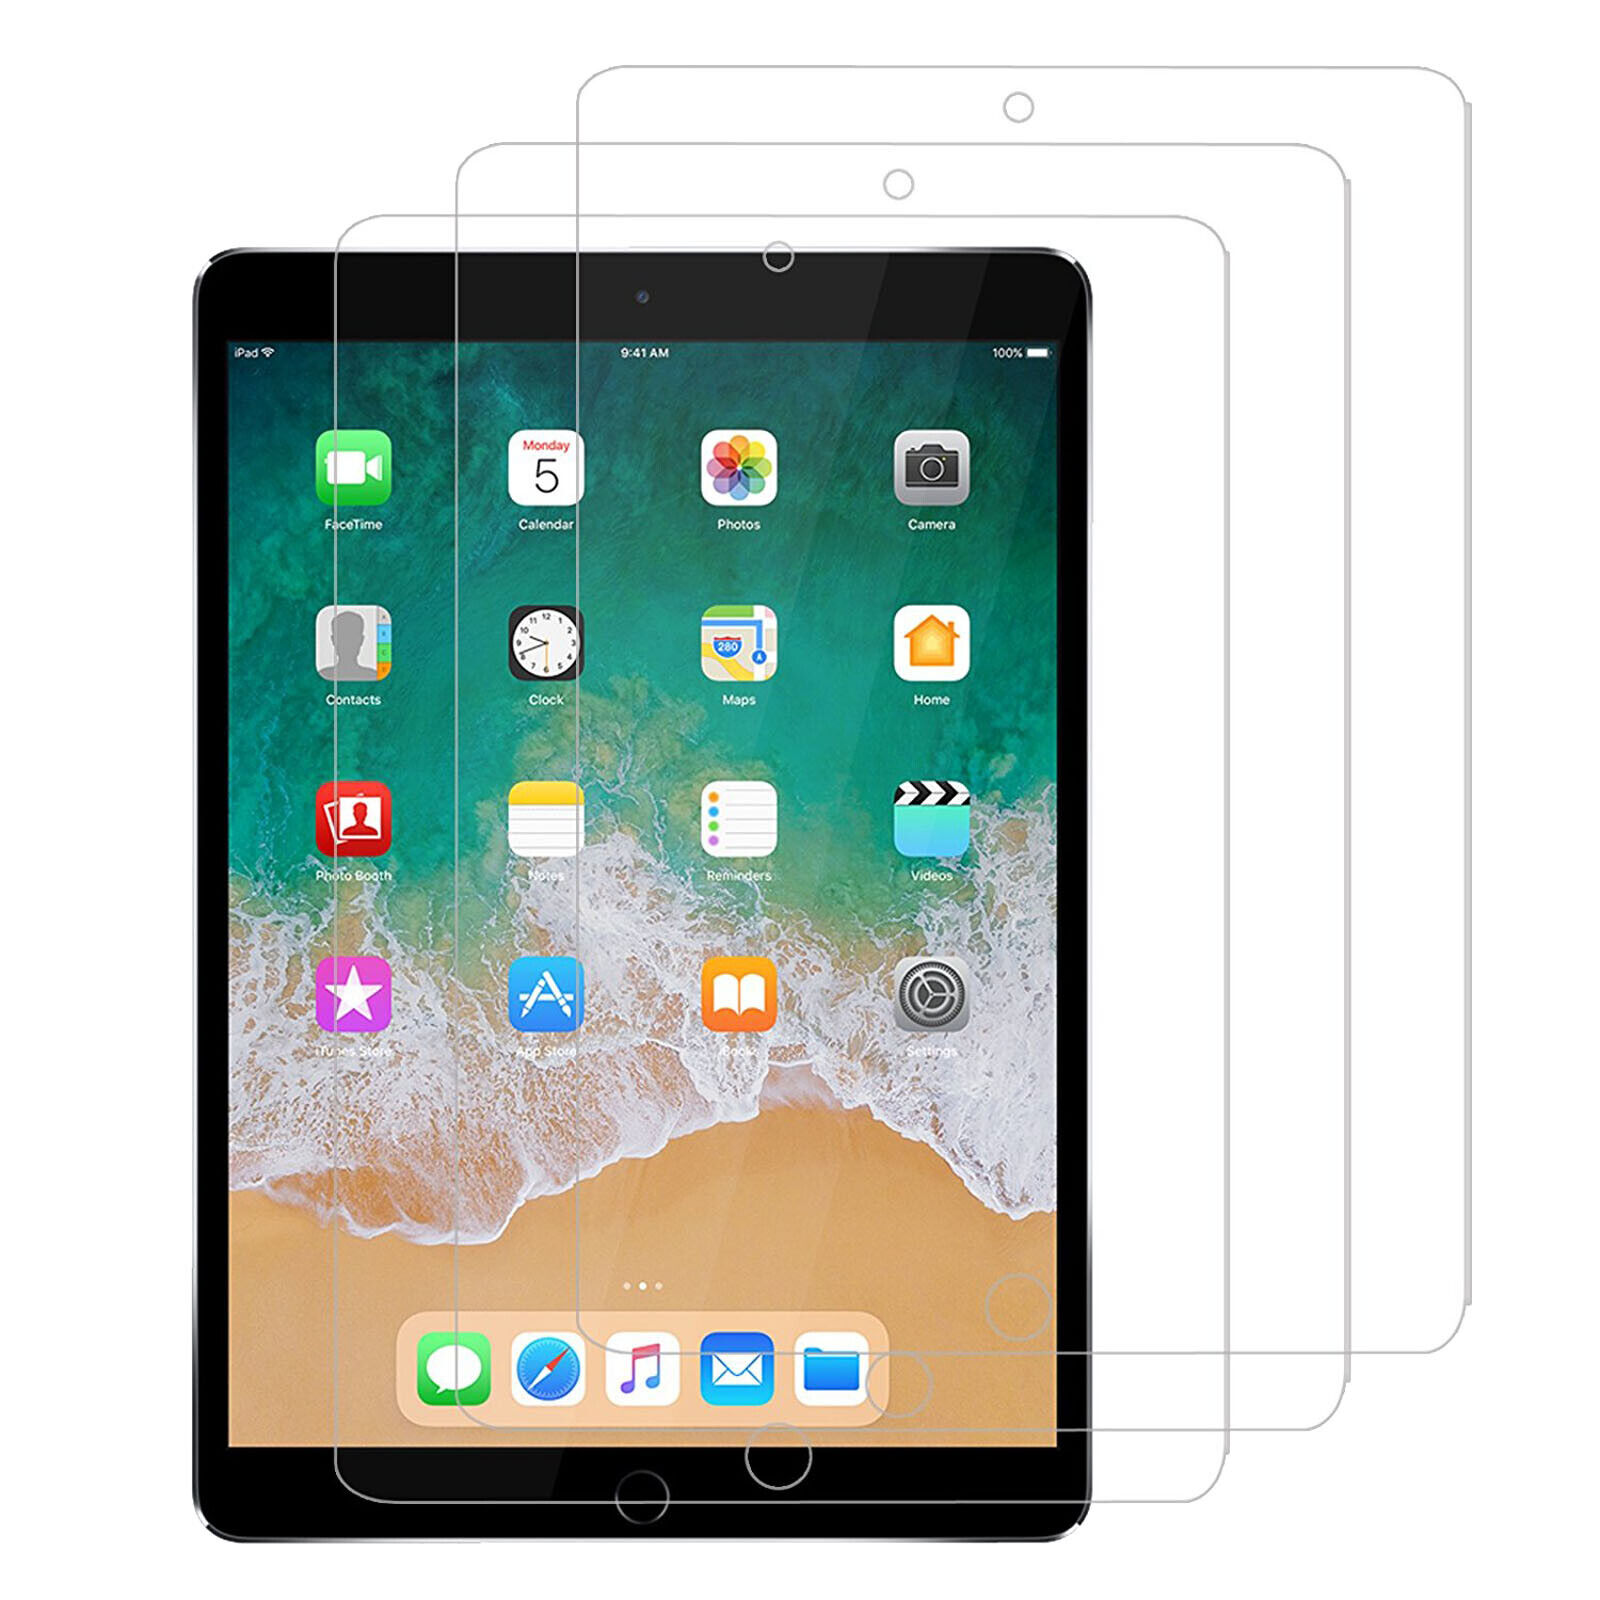 Clear, Touch Responsive Screen Protector 3pcs for Apple iPad 2/3/4 Mini 1 2 3